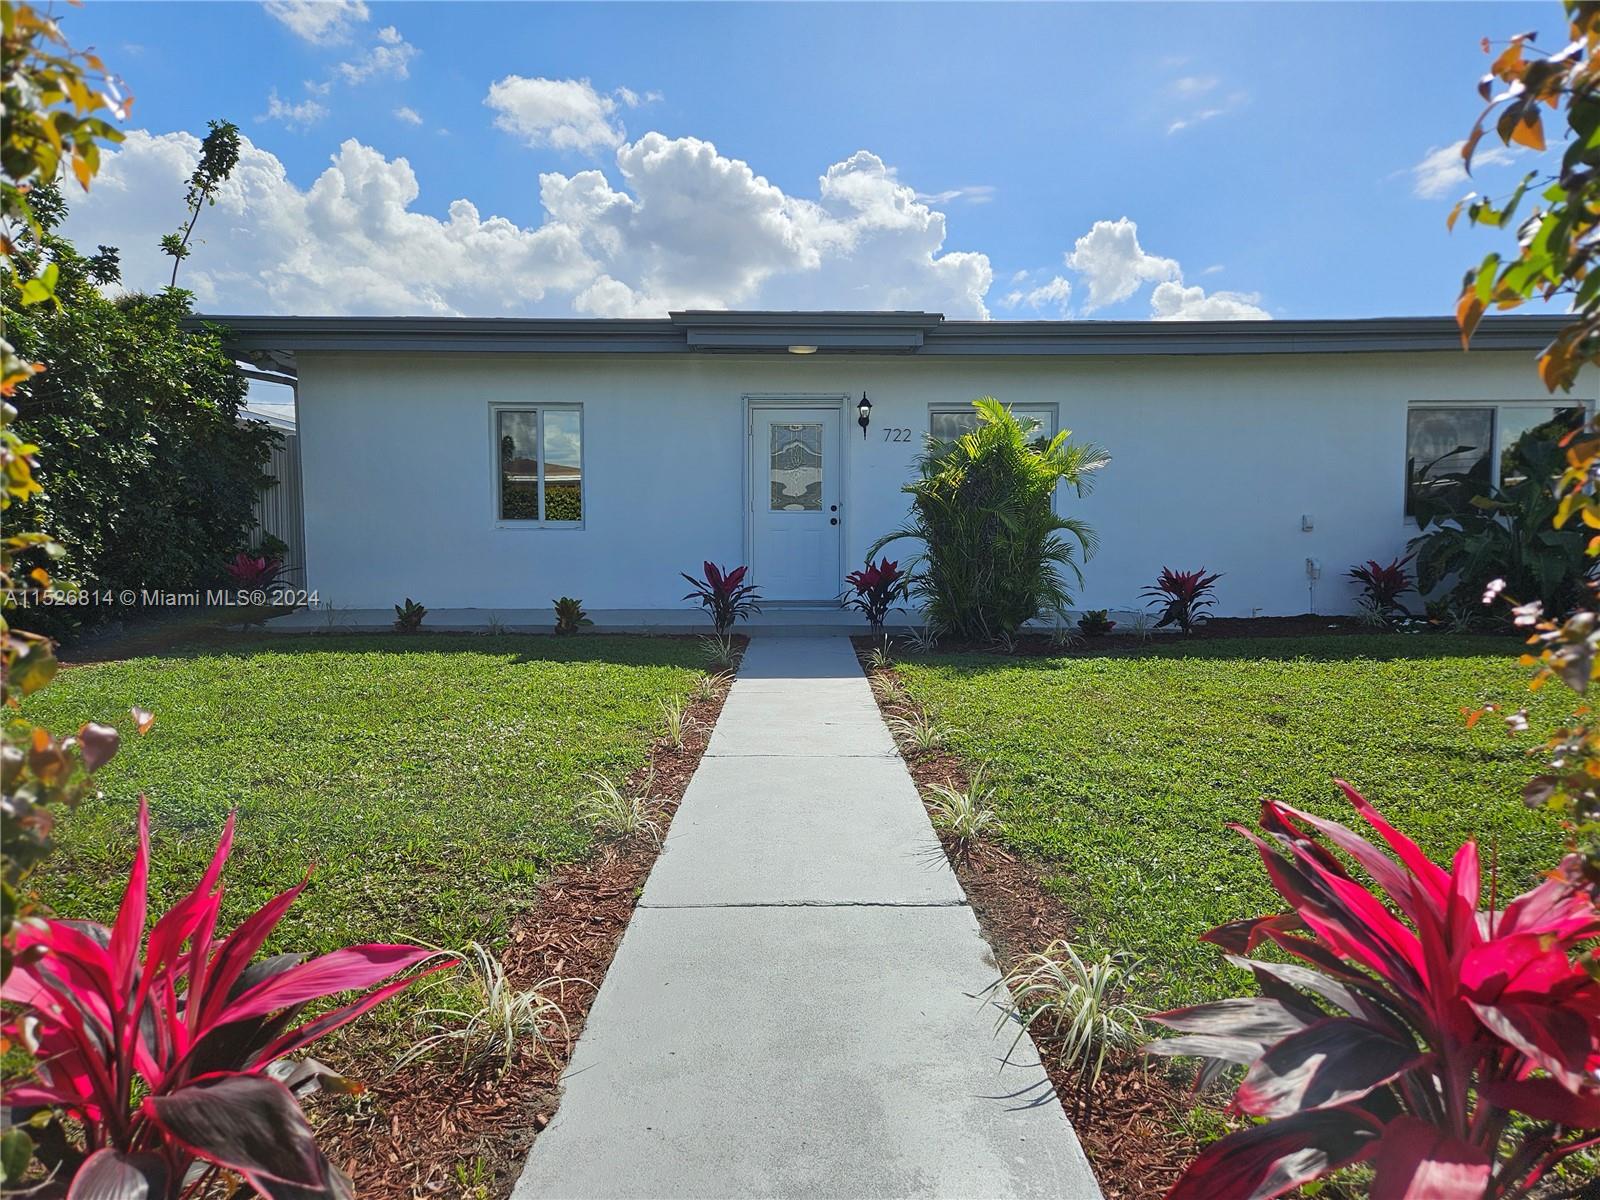 Property for Sale at 722 E 46th St St, Hialeah, Miami-Dade County, Florida - Bedrooms: 4 
Bathrooms: 3  - $710,000